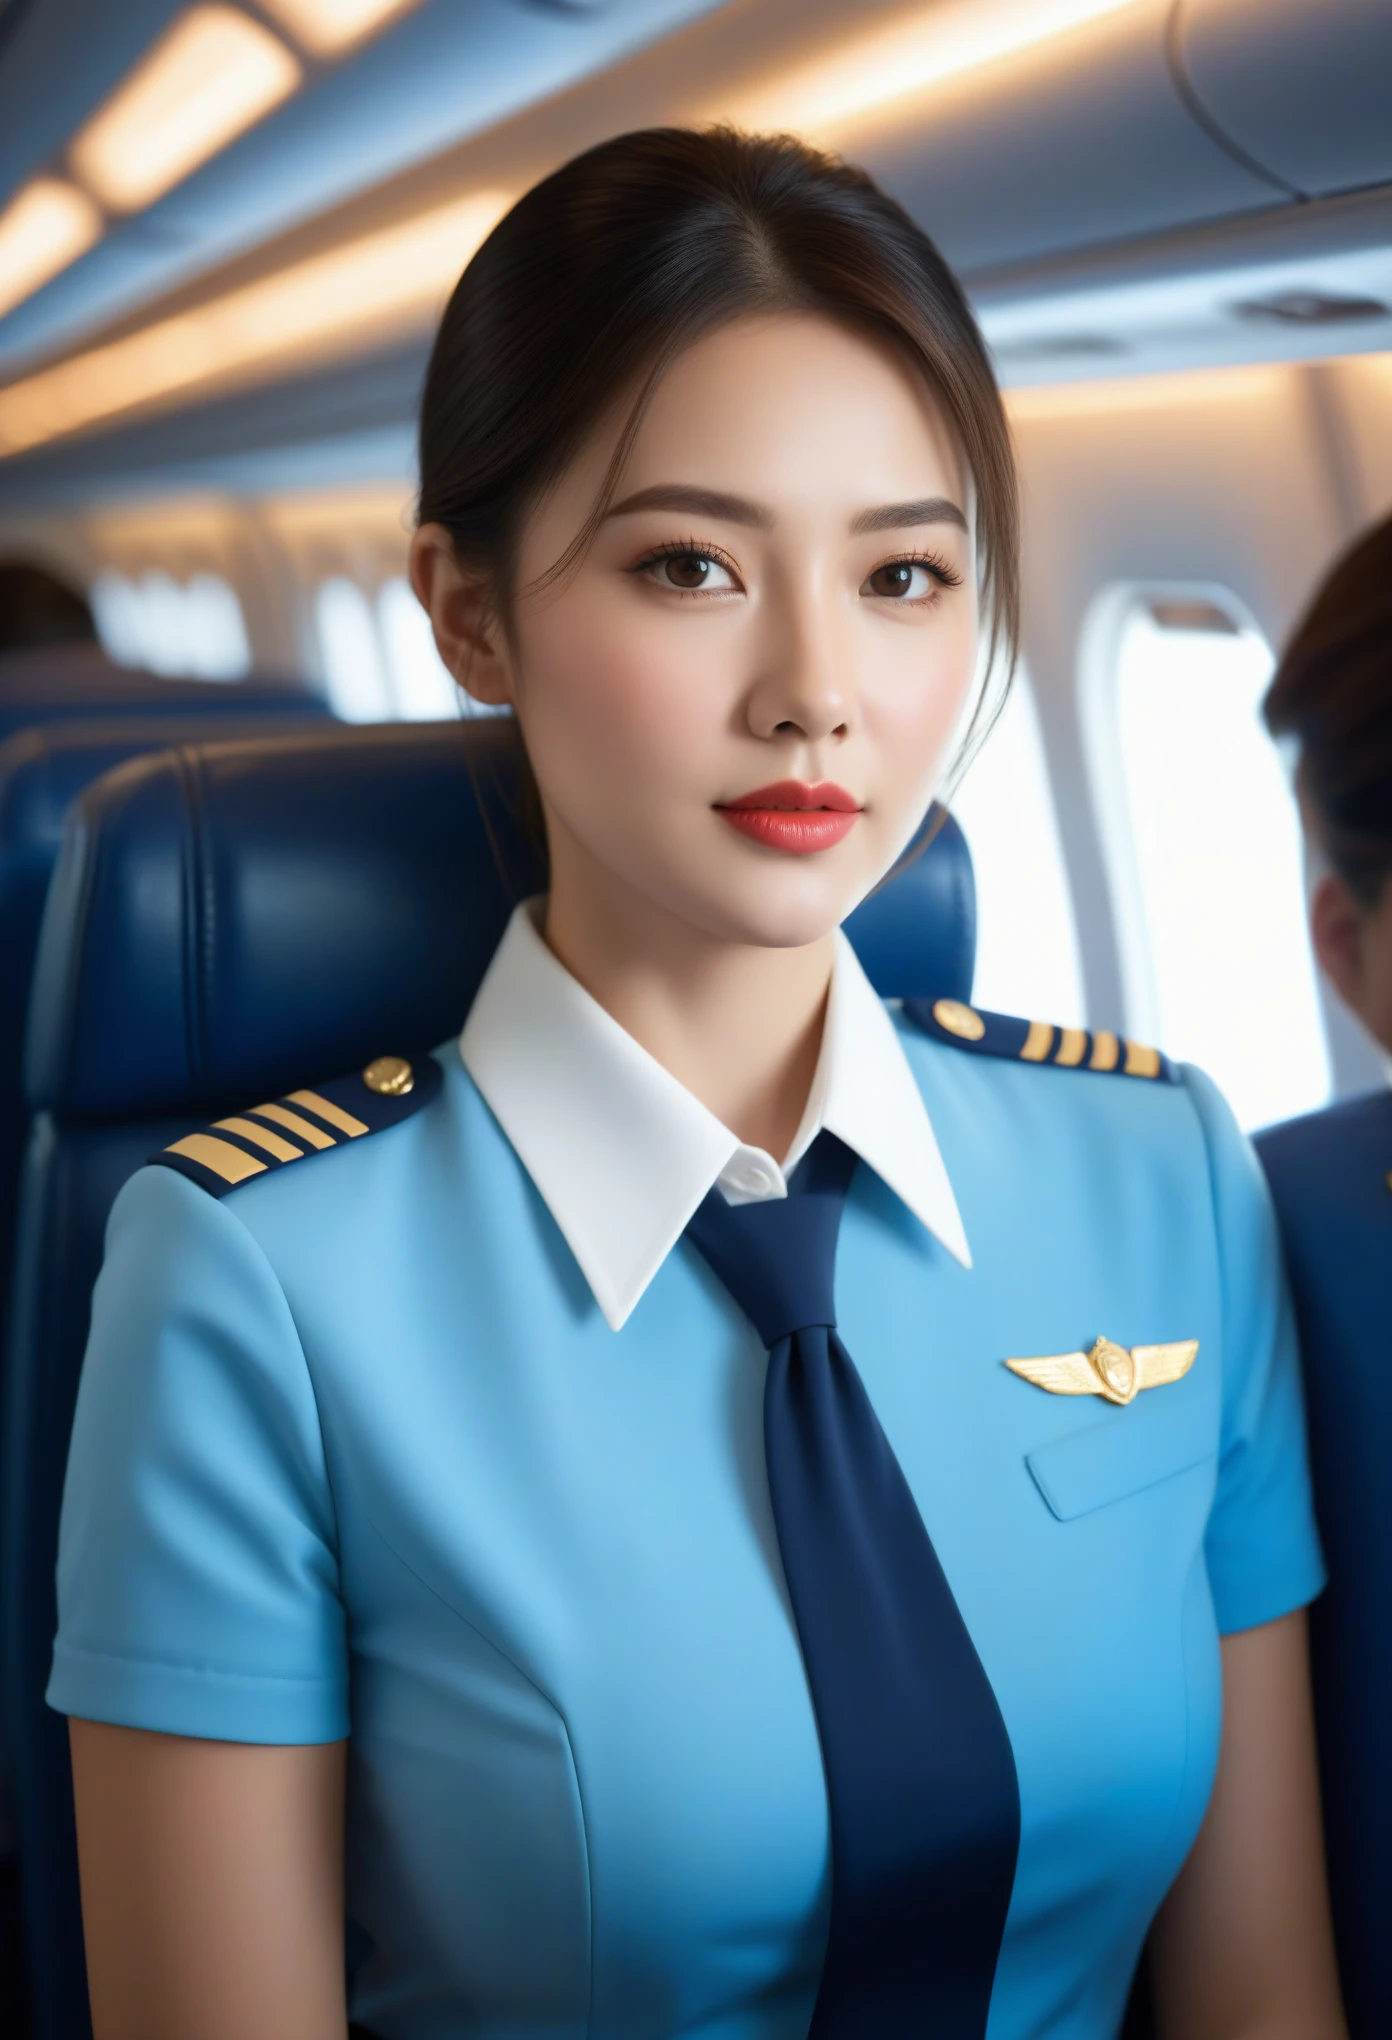 best quality,(original photo:1.2),(masterpiece:1.4),(lifelike:1.4),(high resolution:1.4), 1 girl, depth of field, Airline stewardess, Intricate details,8K, Very detailed, perfect lighting, epic background